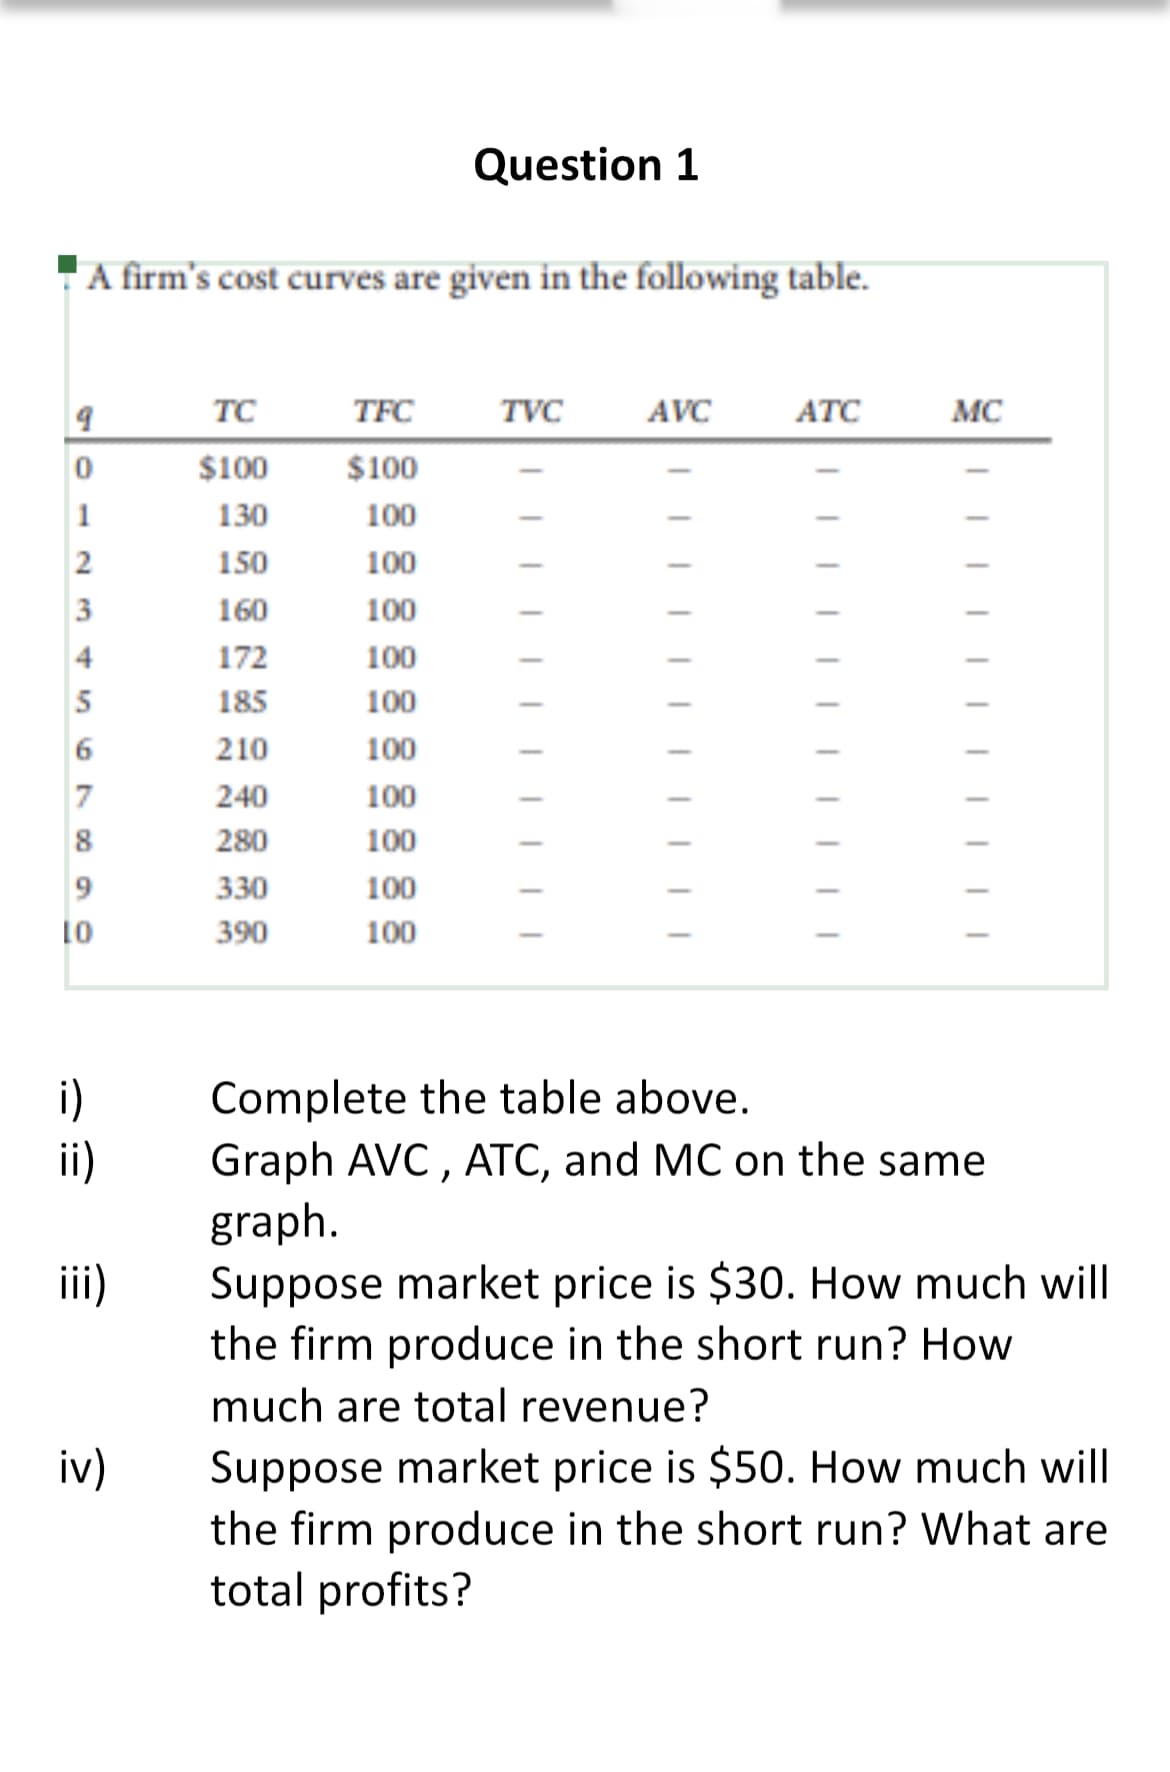 A firm's cost curves are given in the following table.
9
0
1
2
3
4
5
6
7
8
9
LO
i)
ii)
iii)
iv)
TC
$100
130
150
160
172
185
210
240
280
330
390
TFC
$100
100
100
100
100
100
100
100
100
Question 1
100
100
TVC
AVC
ATC
MC
Complete the table above.
Graph AVC, ATC, and MC on the same
graph.
Suppose market price is $30. How much will
the firm produce in the short run? How
much are total revenue?
Suppose market price is $50. How much will
the firm produce in the short run? What are
total profits?